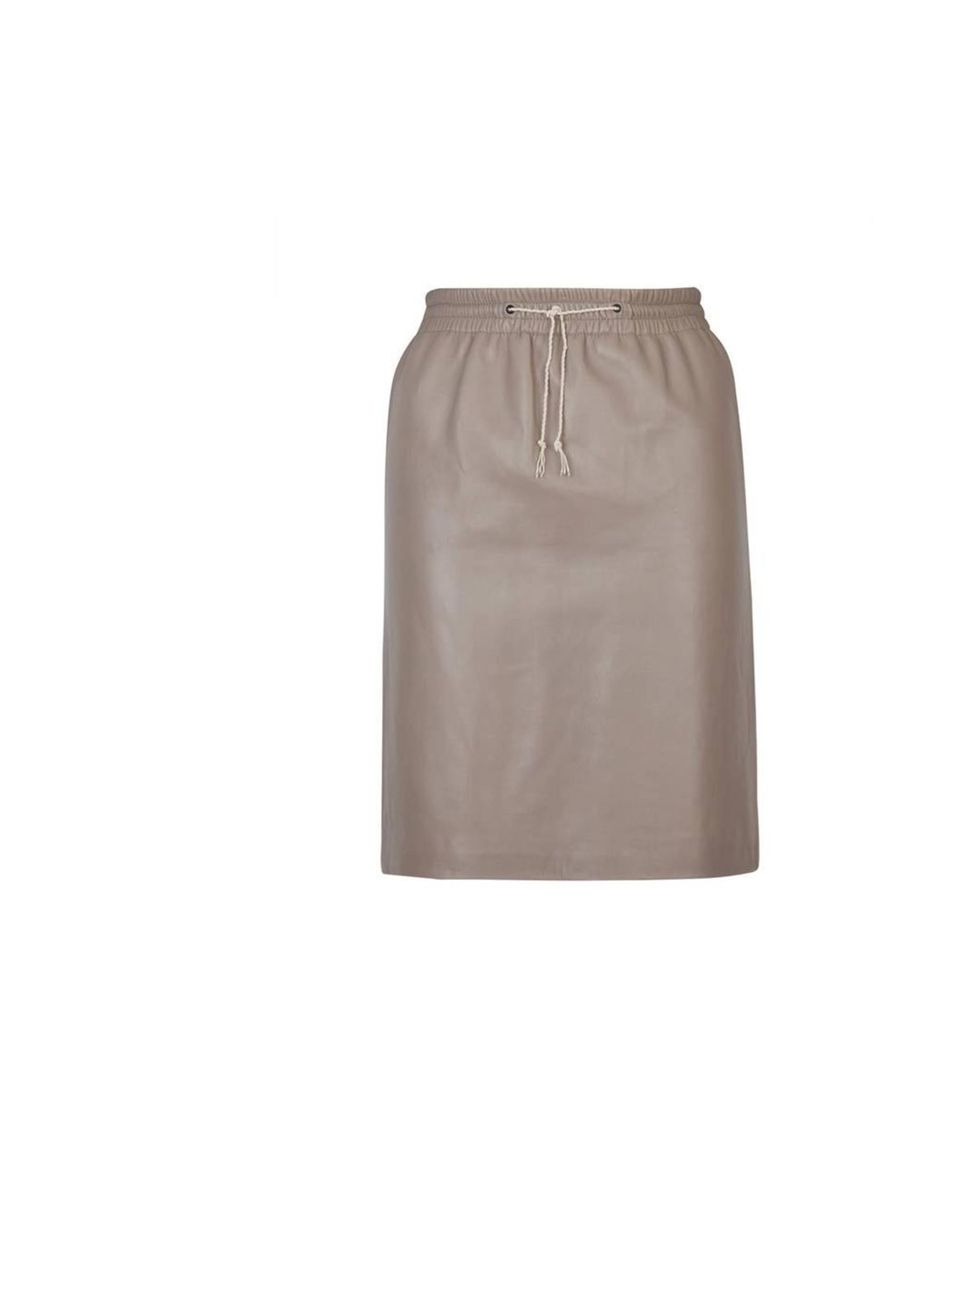 <p><a href="http://www.peridotlondon.co.uk/">Peridot London</a> leather skirt, £520</p><p>Peridot London was started in 2010 by Rachel Wilson. The brand's entire creative process is based in their Baker Street, Marylebone HQ, from inspiration right up to 